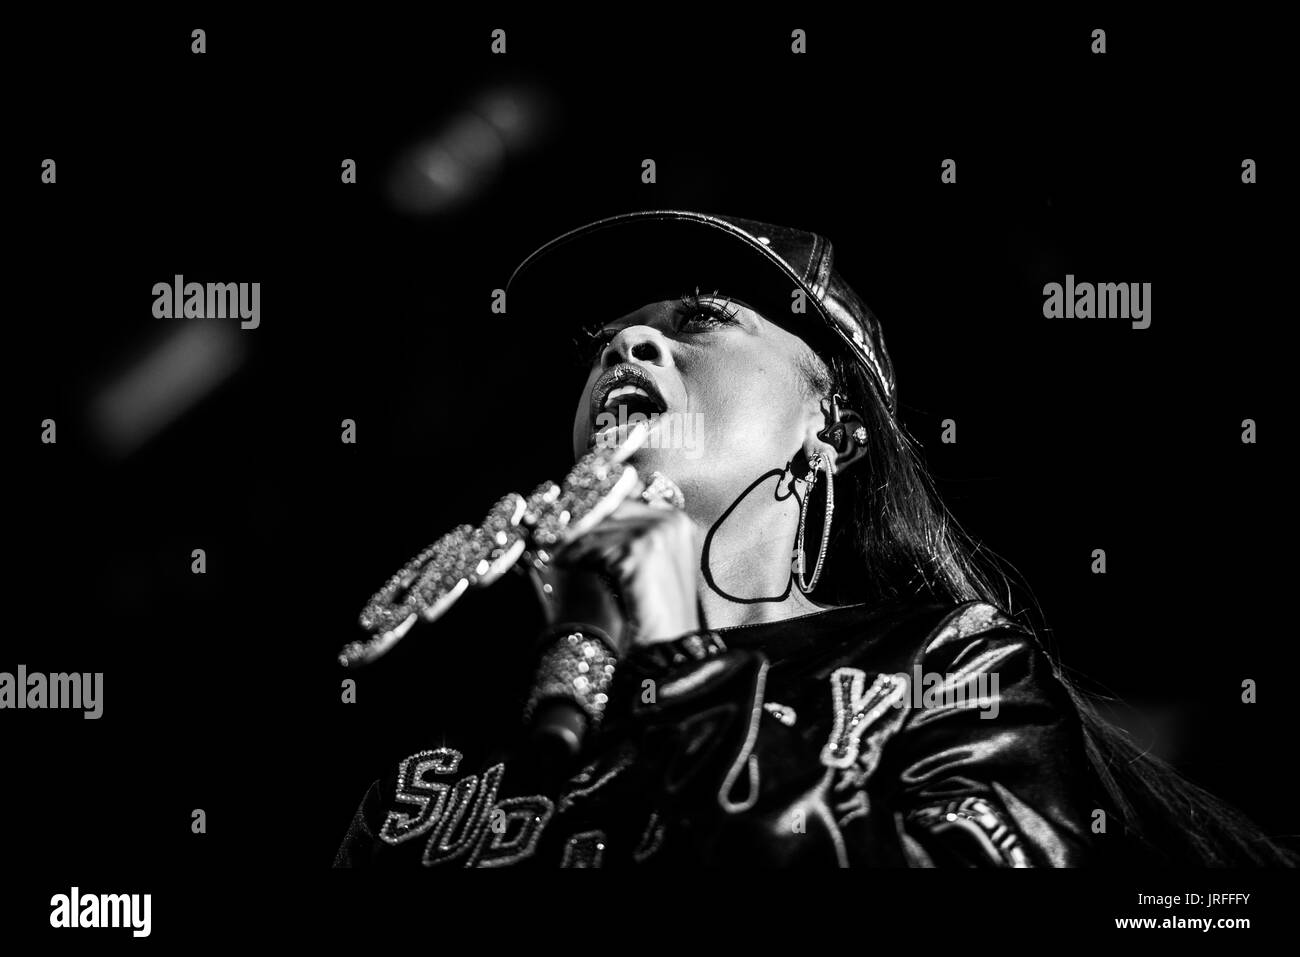 Missy elliott performing hires stock photography and images Alamy